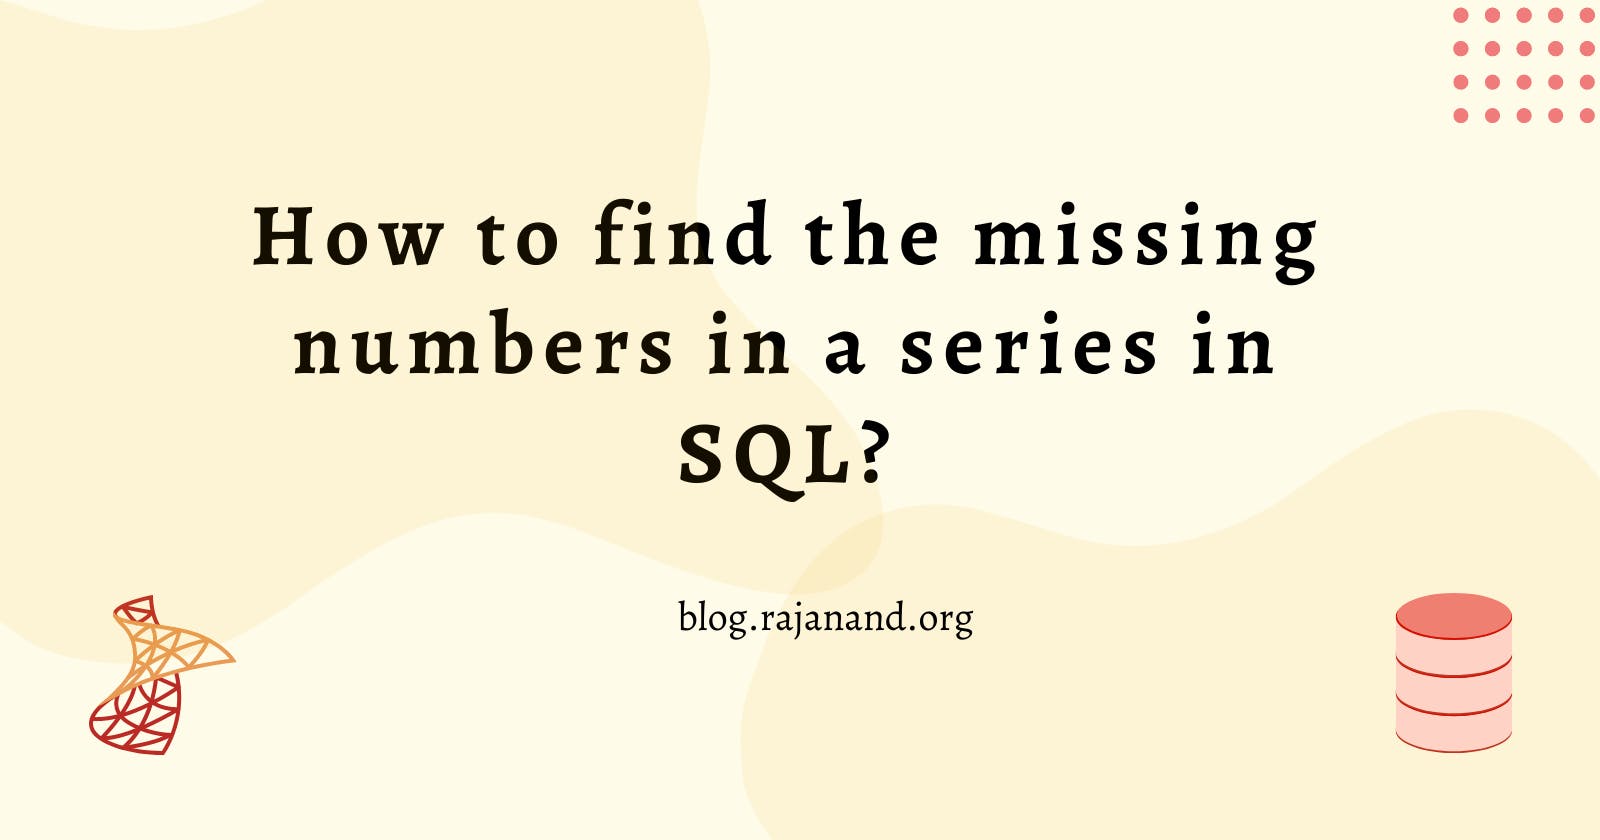 How to find the missing numbers in a series?